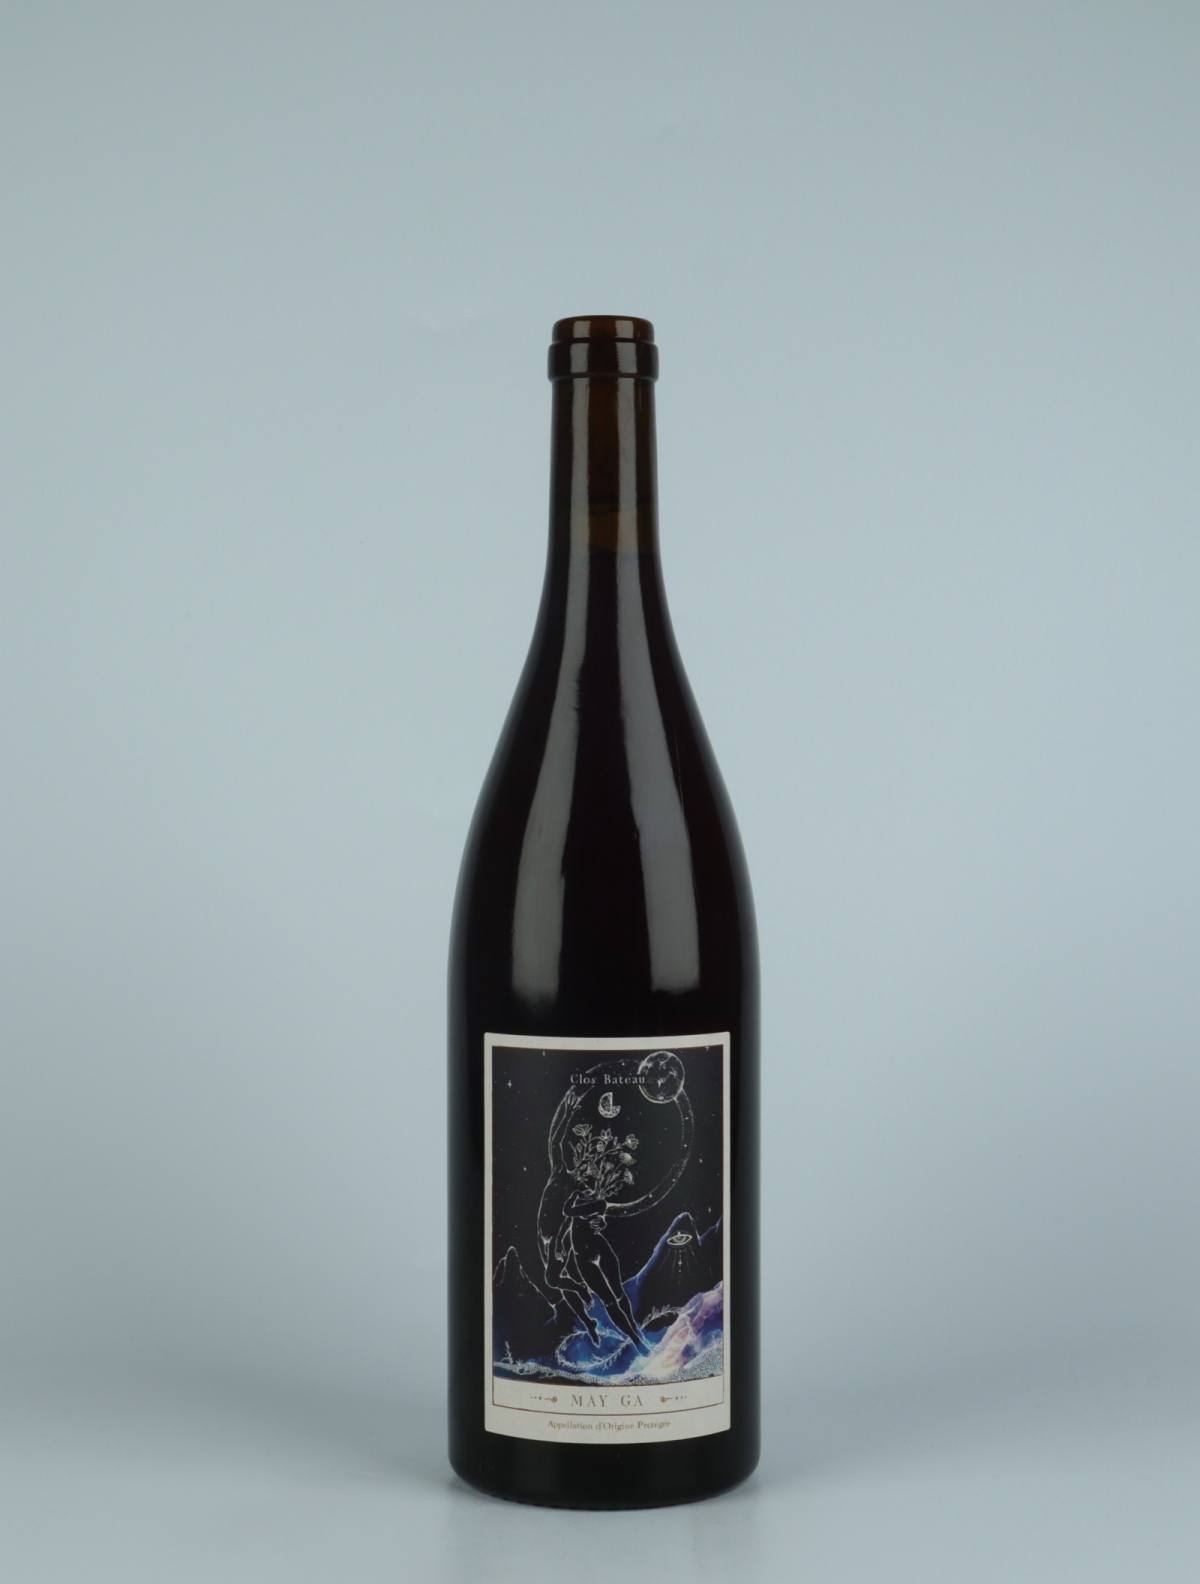 A bottle 2021 Mayga Red wine from Clos Bateau, Beaujolais in France